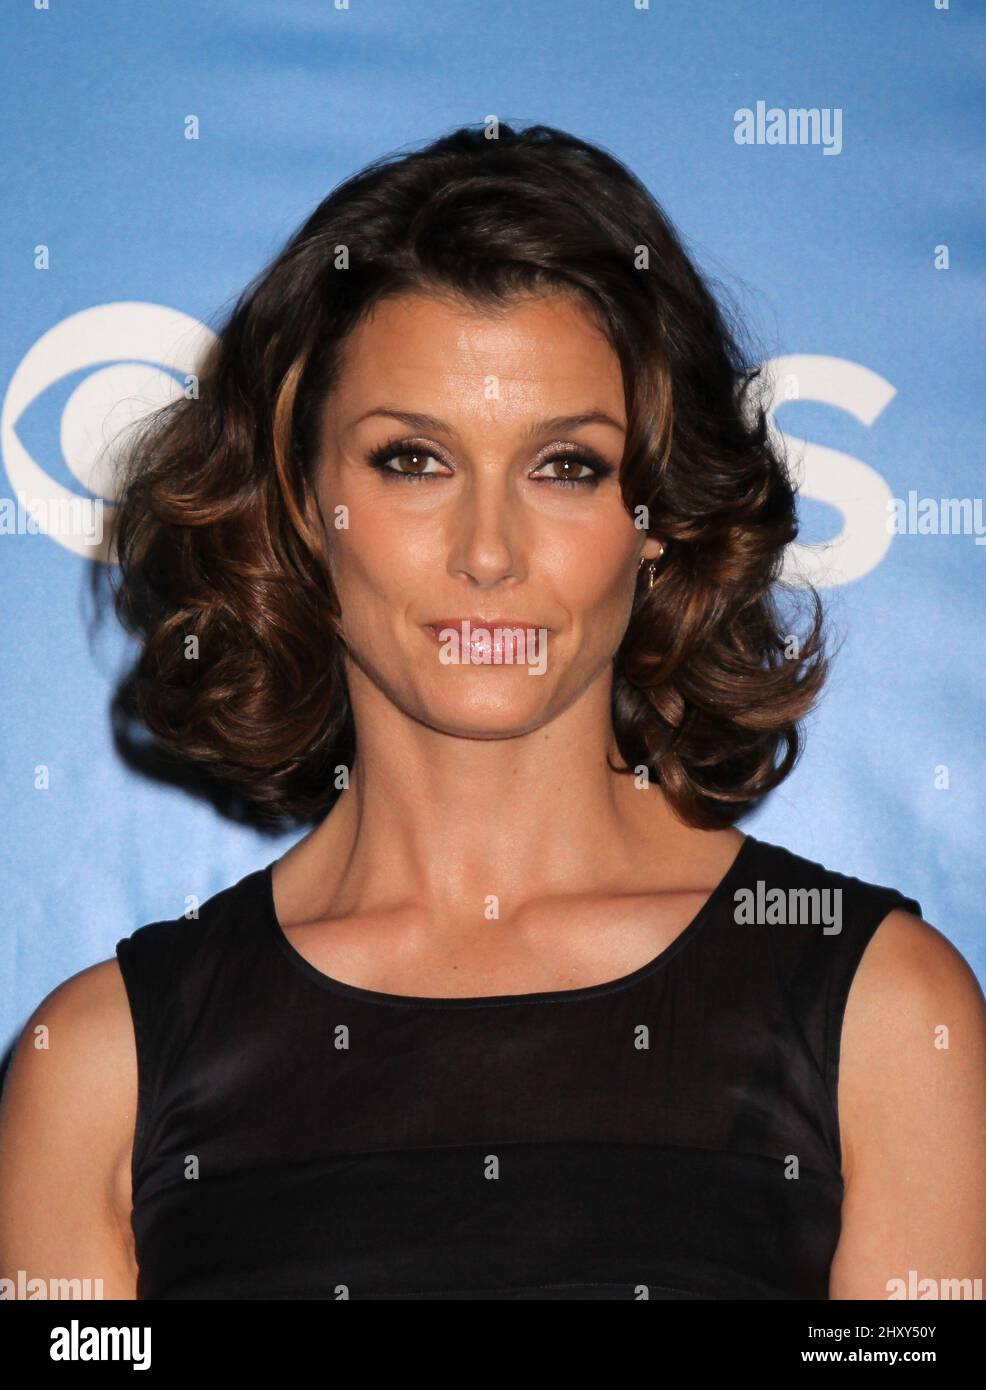 Bridget Moynahan attends the CBS 2012 Upfronts event in New York. Stock Photo